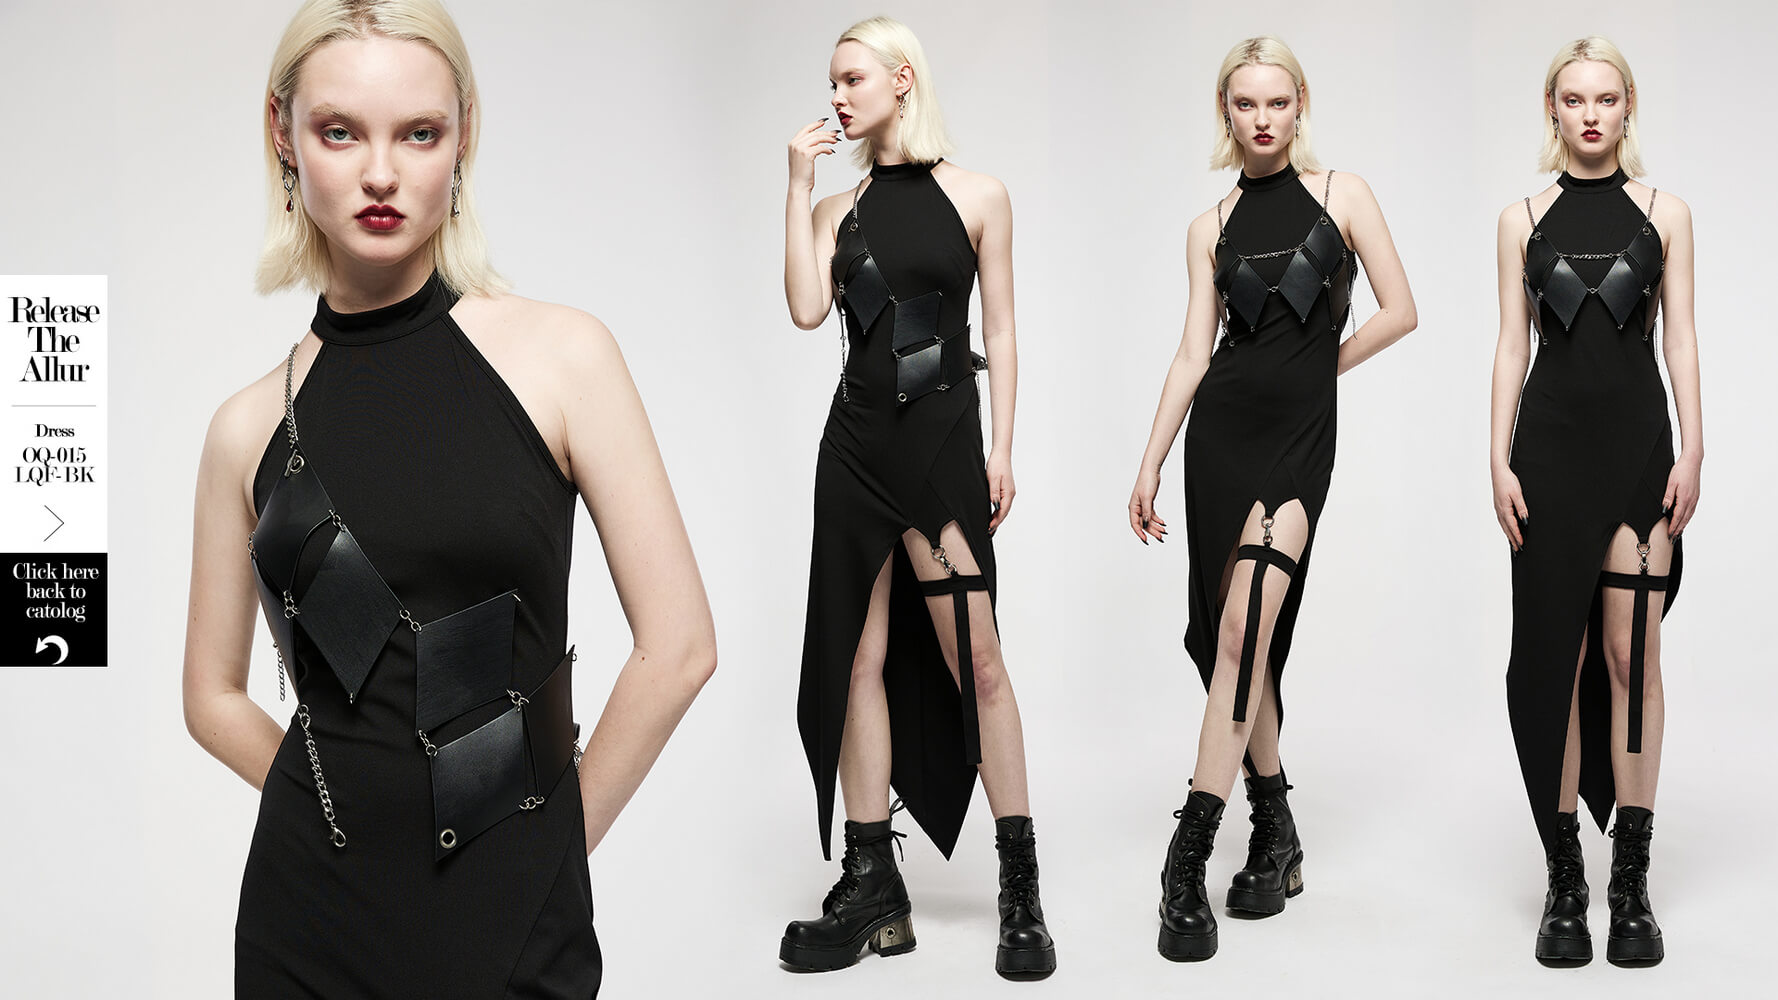 Black Vegan Leather Multi-Strap Chain Harness Top for Edgy Style - HARD'N'HEAVY